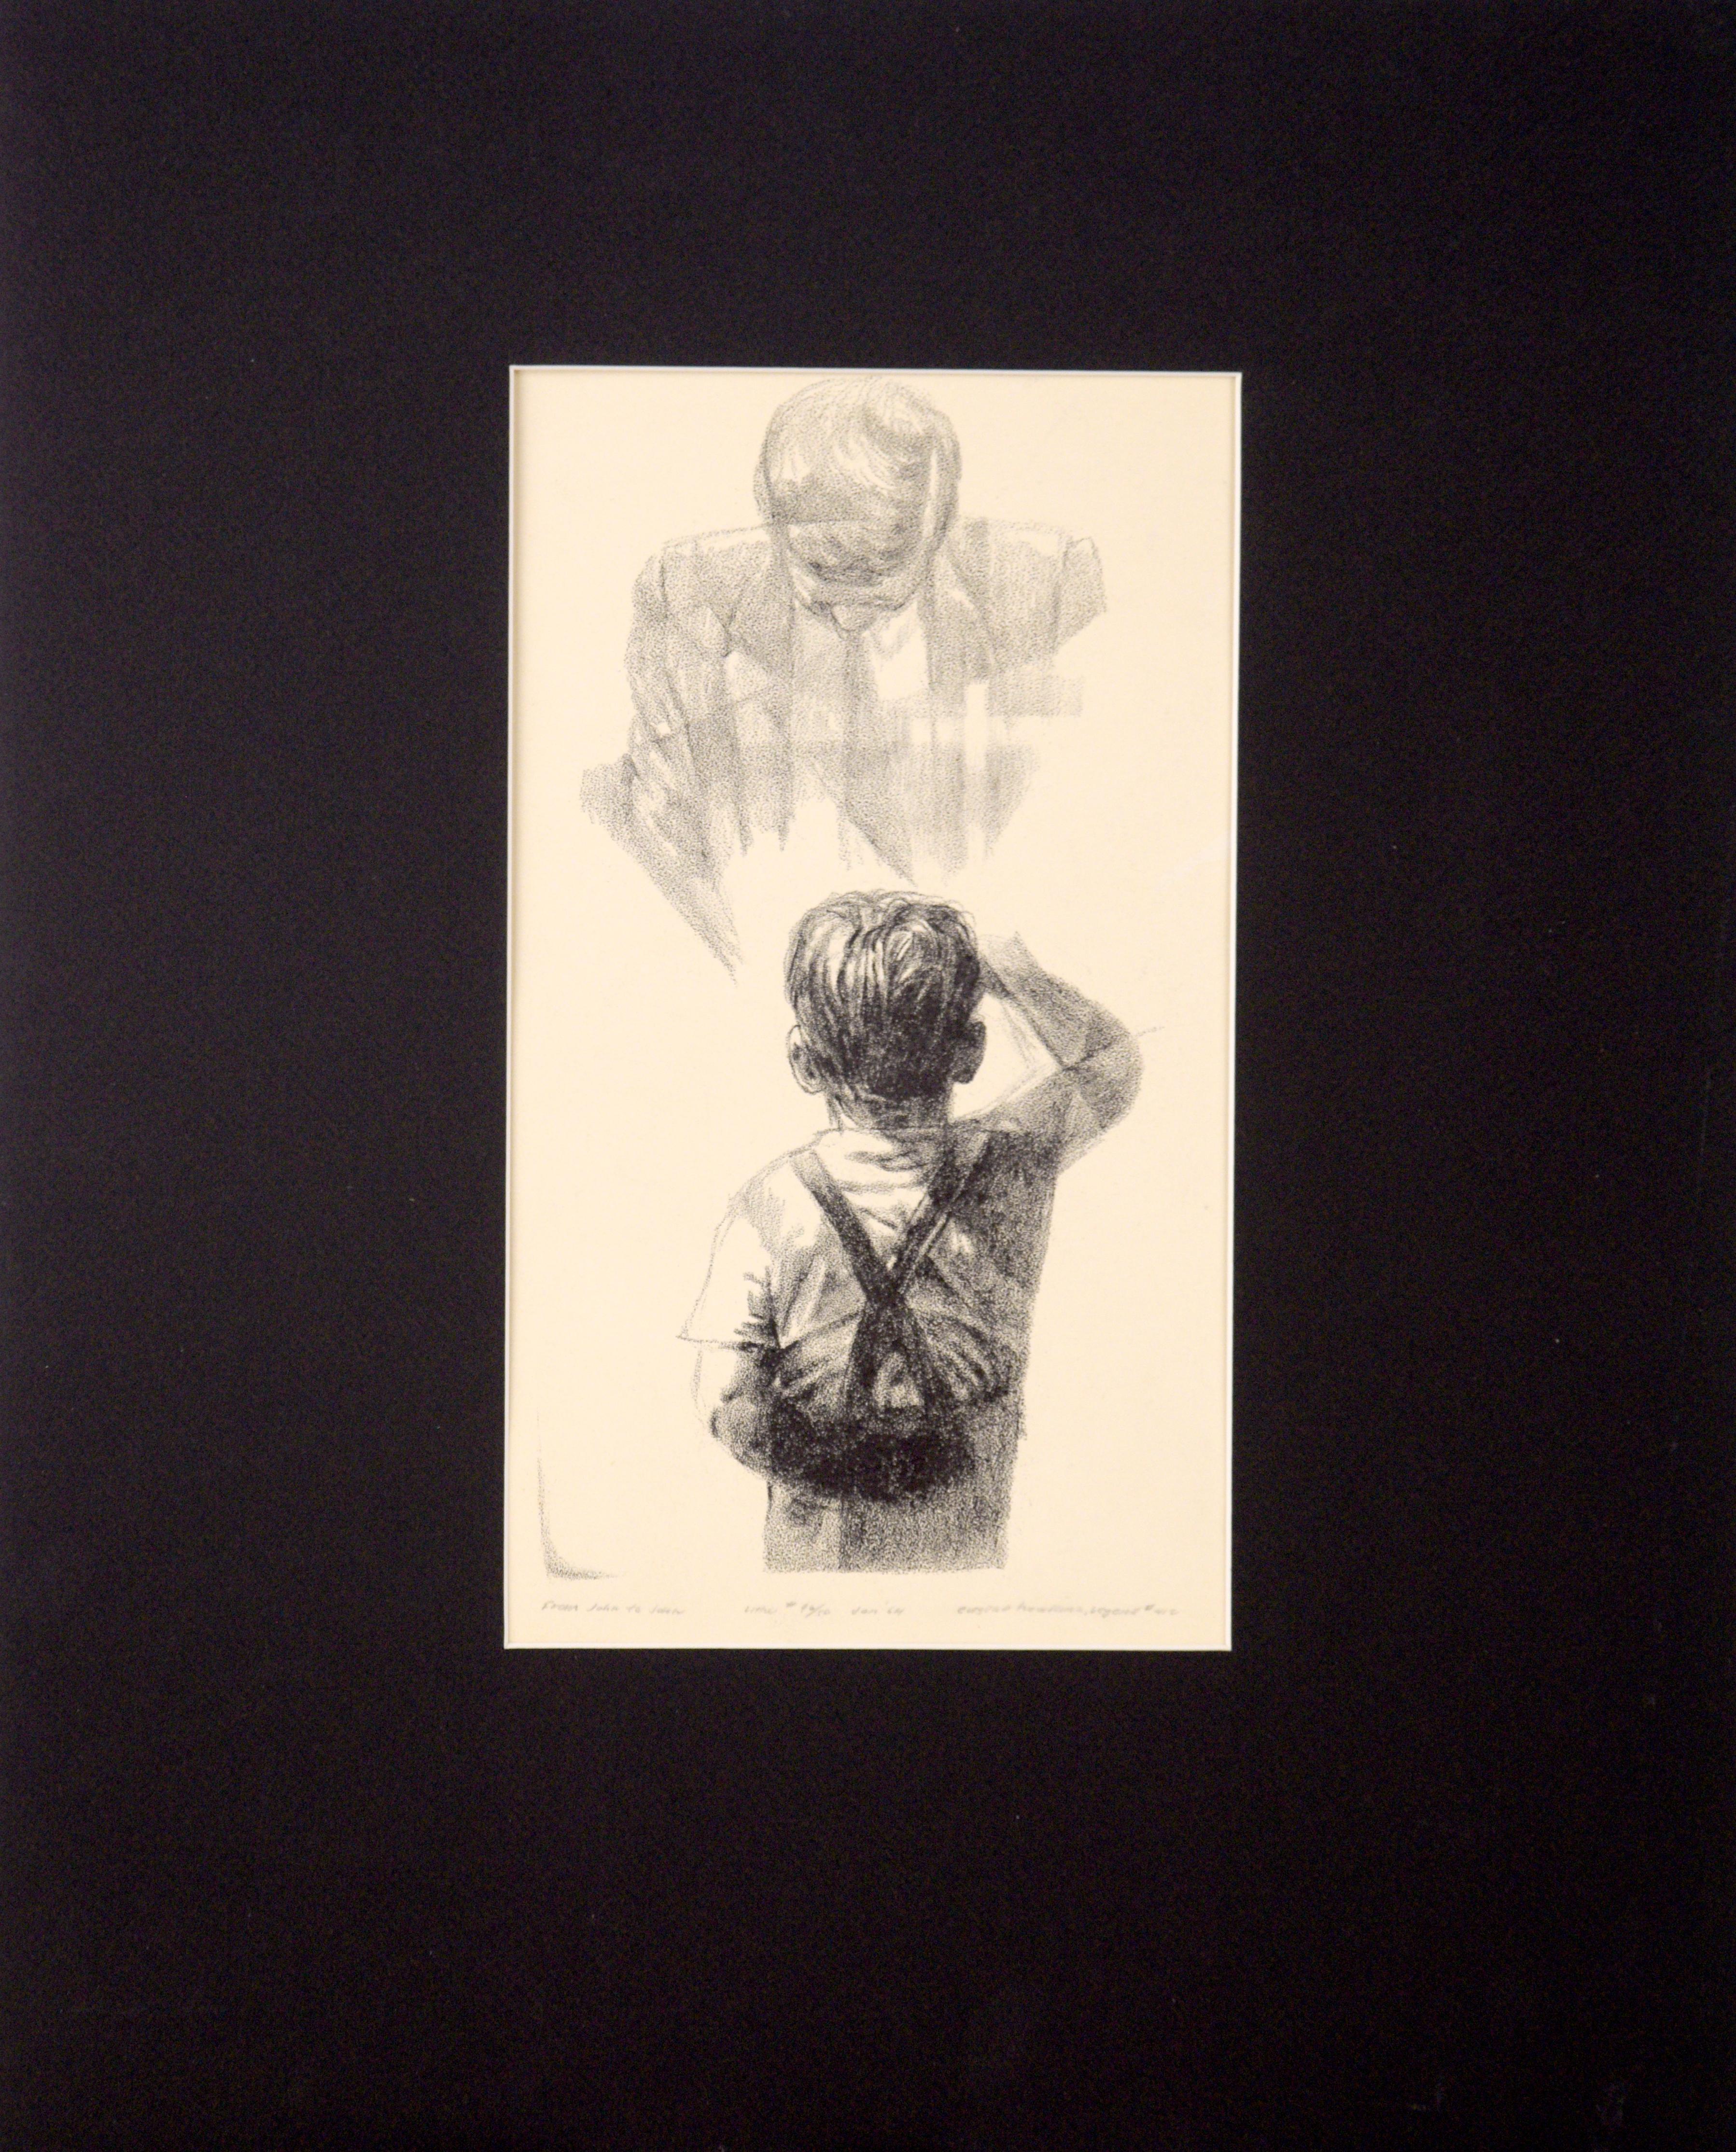 Eugene Hawkins Figurative Print - John F. Kennedy, Jr. Salutes His Father, the President - Rare Signed Lithograph